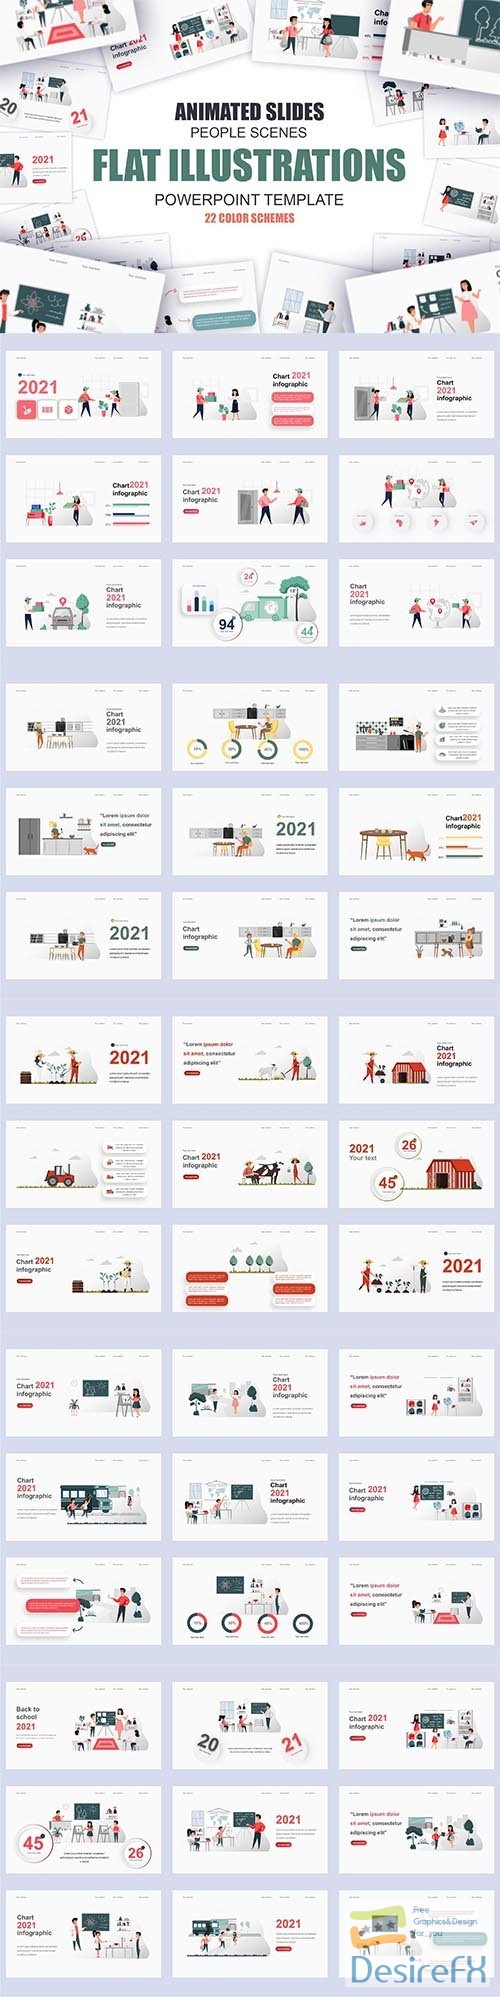 Back to School Illustration Powerpoint Template